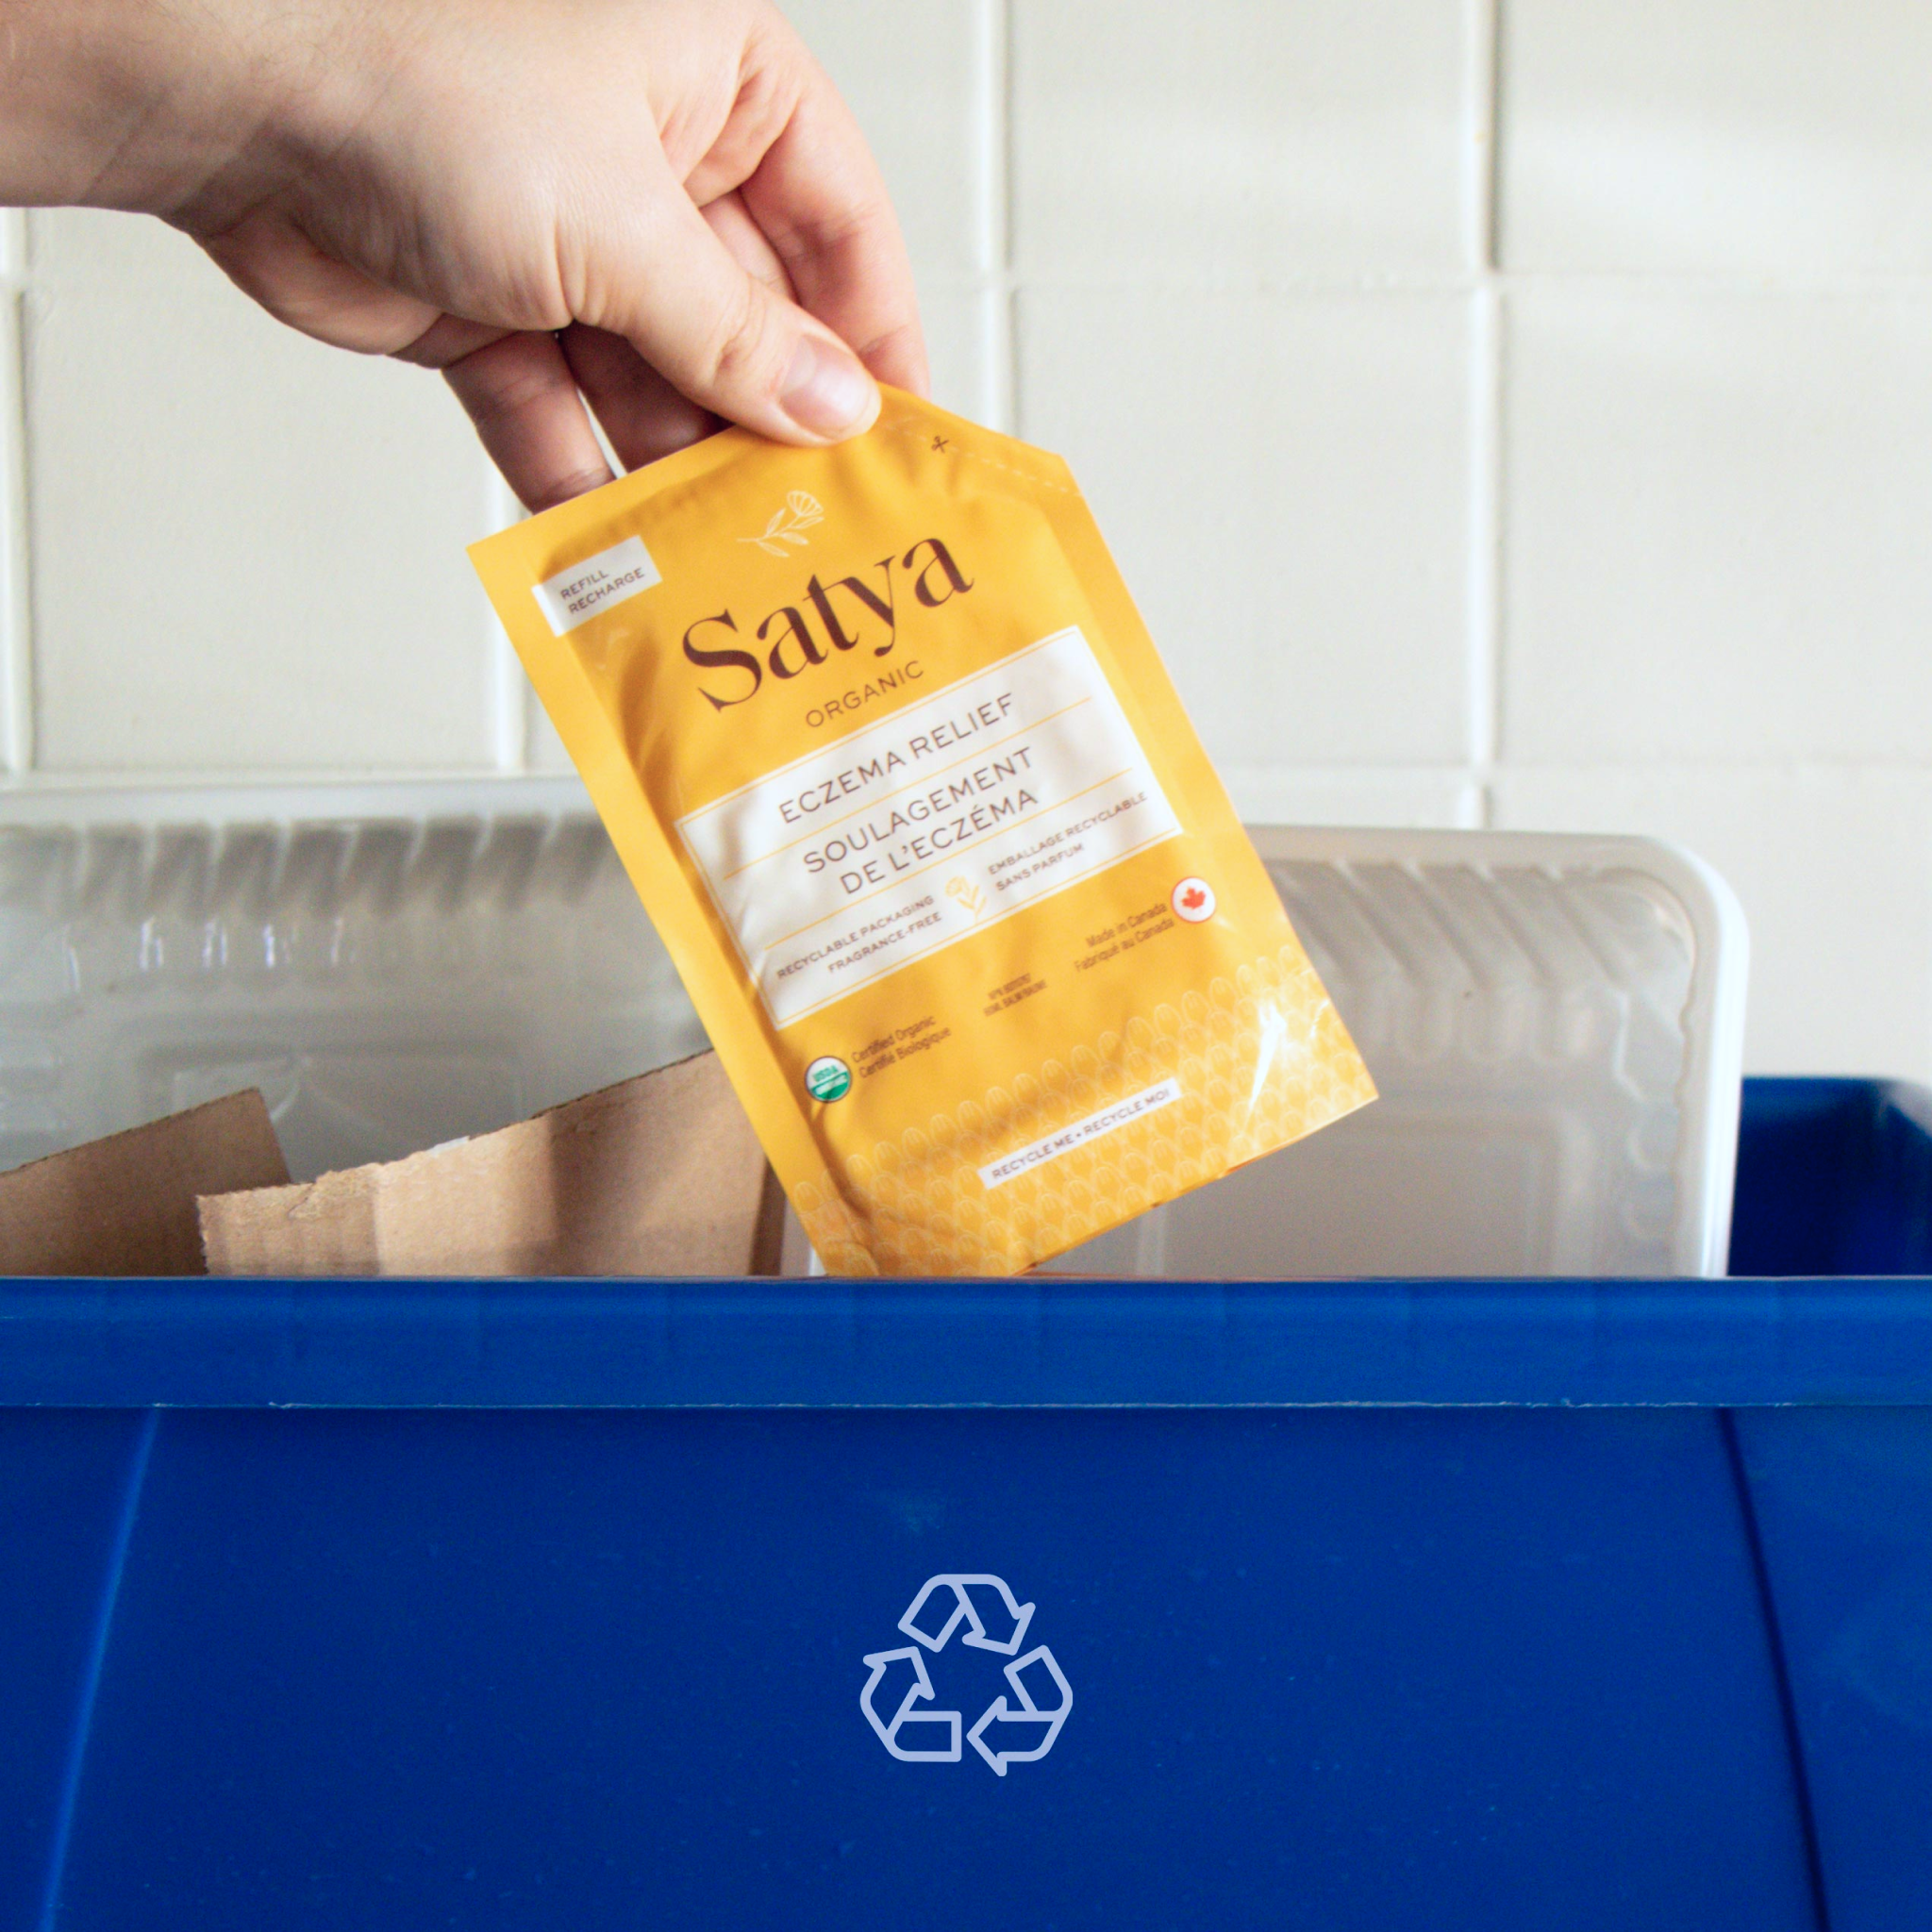 Satya packaging is recyclable.